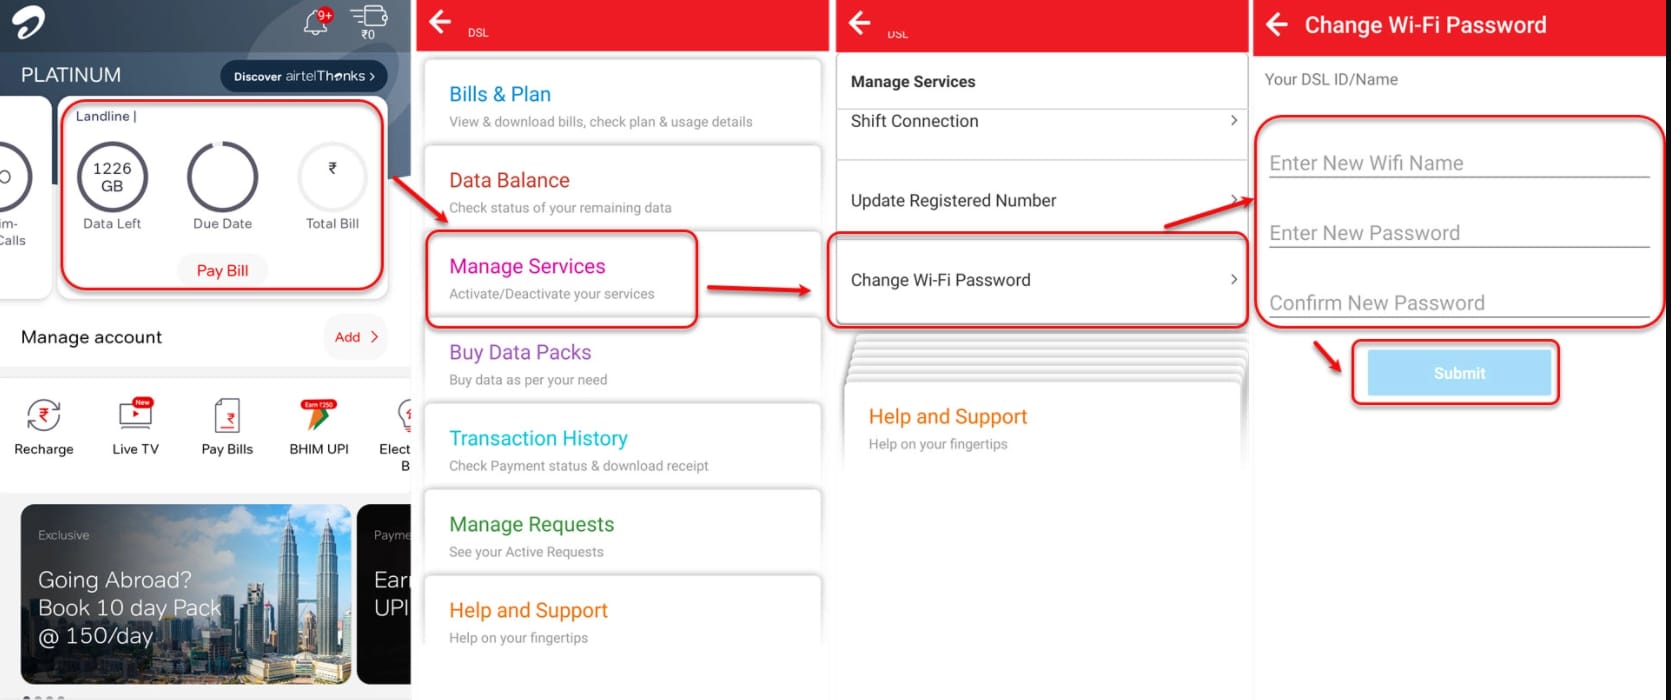 How to change Airtel WiFi password using the app?